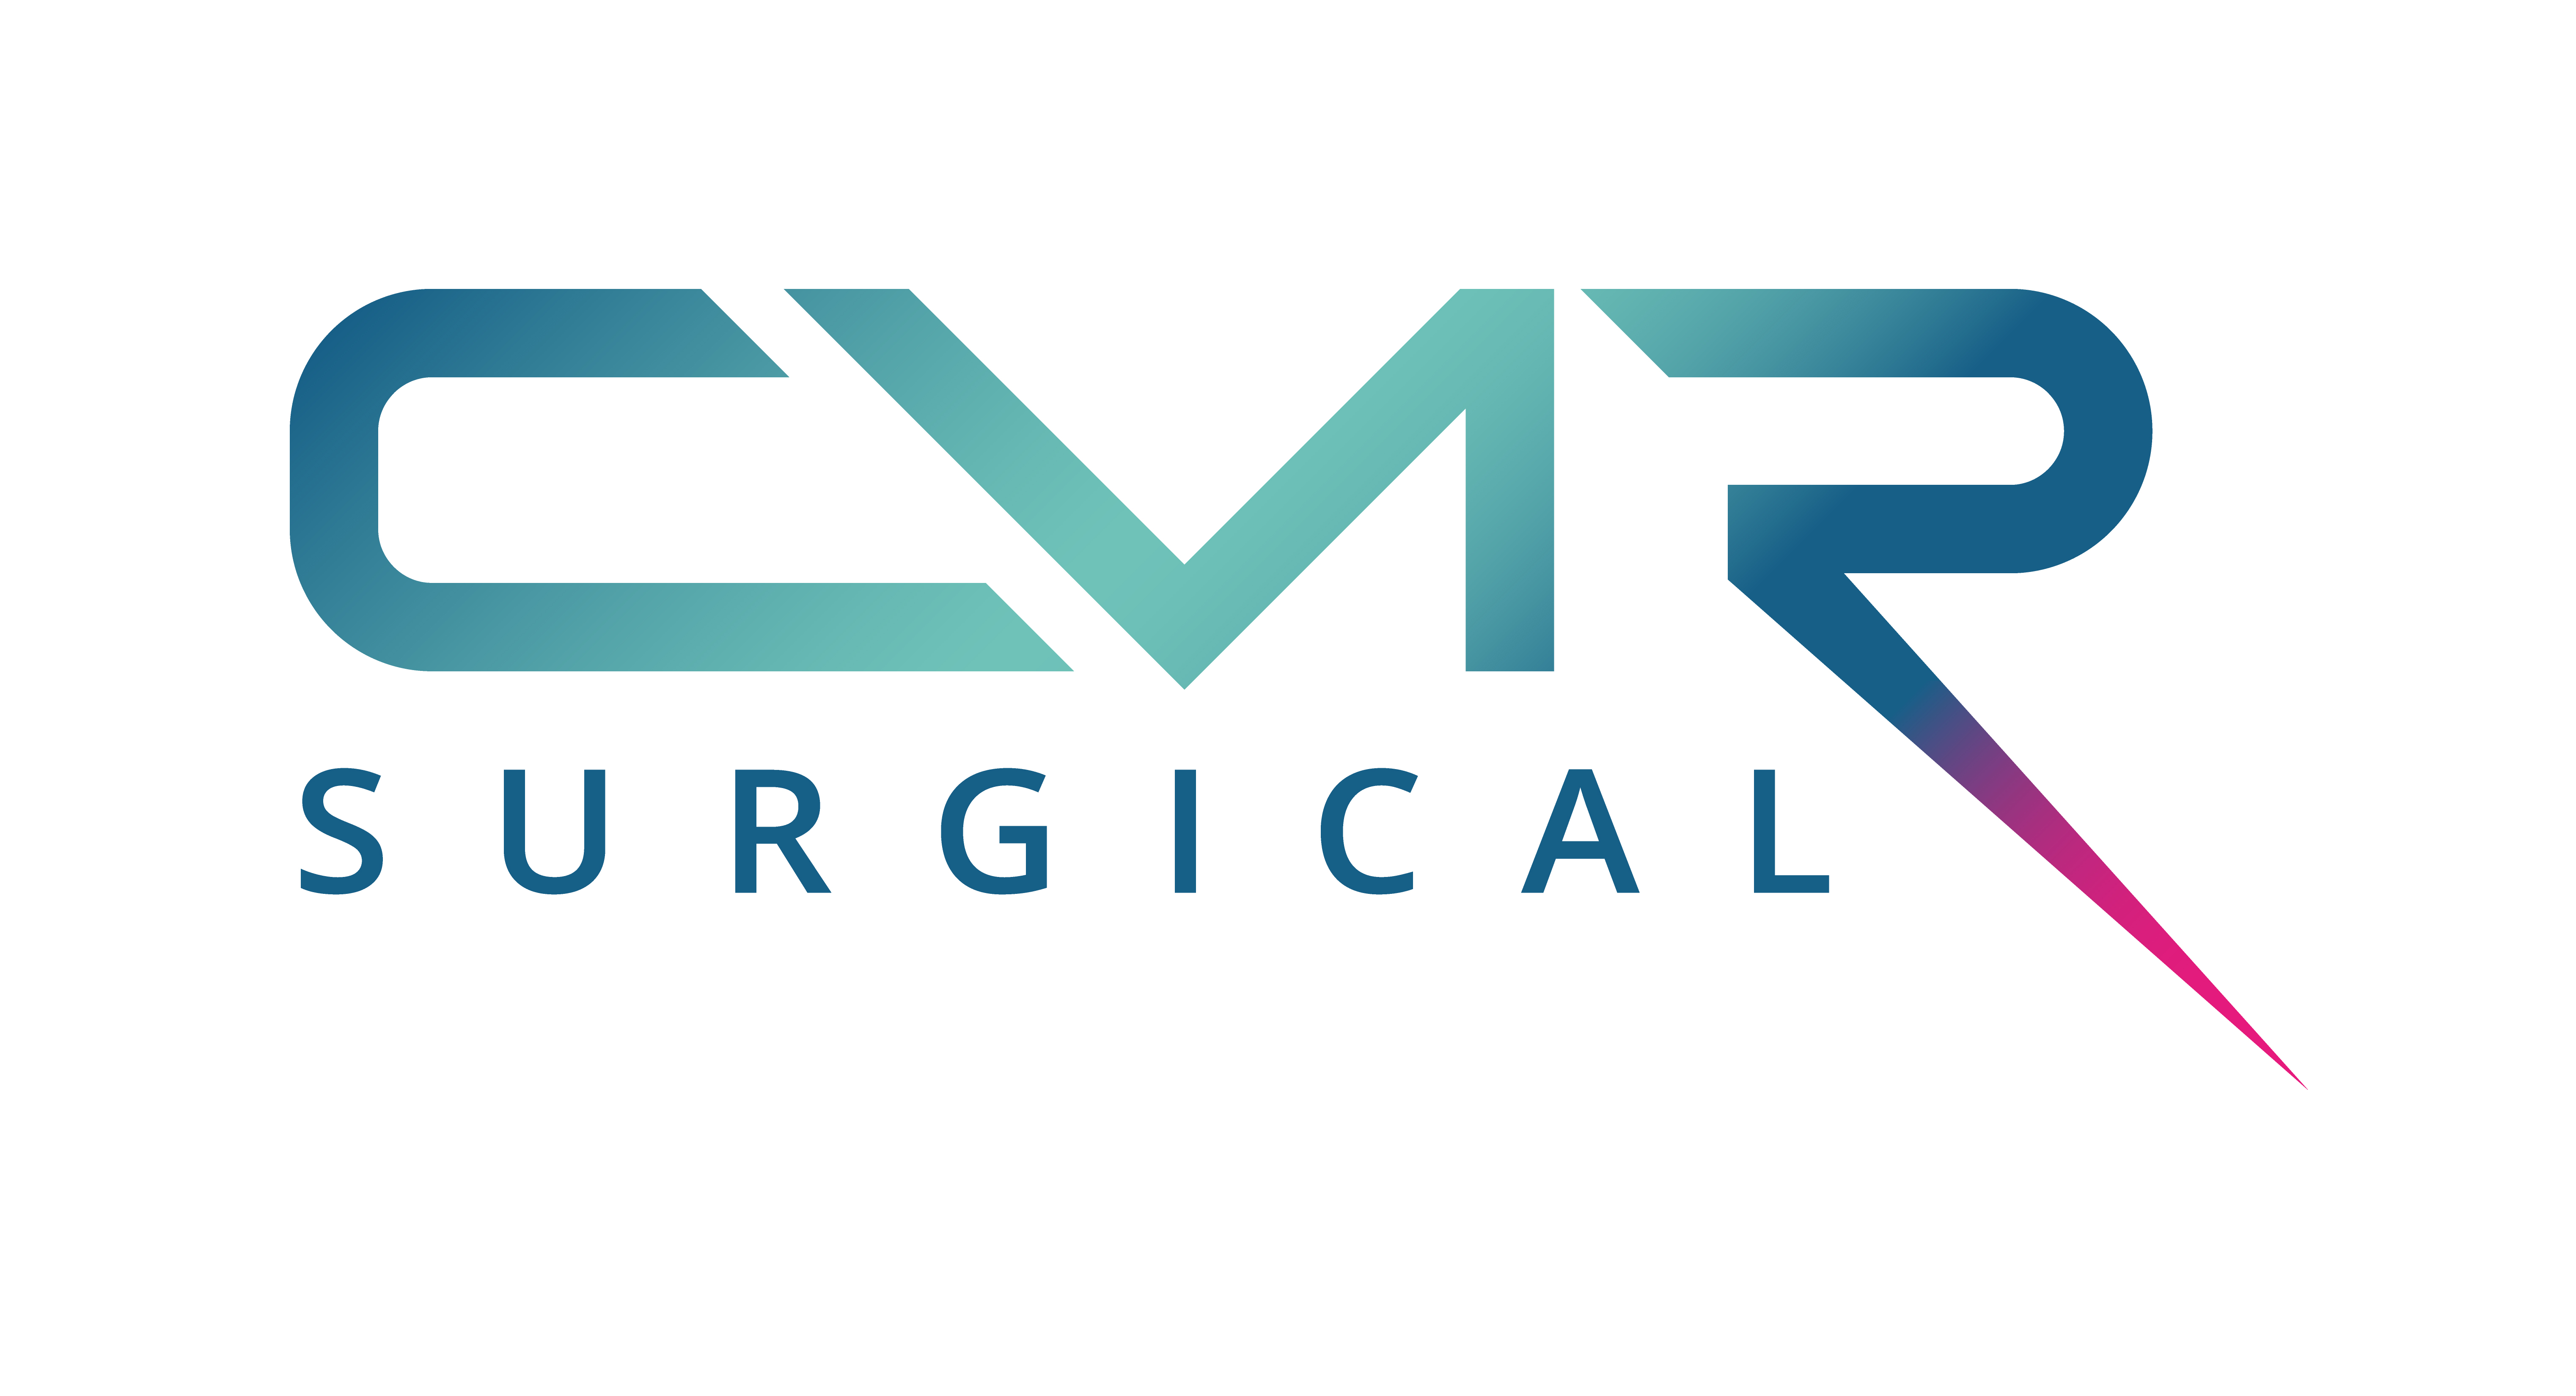 CMR Surgical appoints Daniel Moore as Non-Executive Chairman - GlobeNewswire